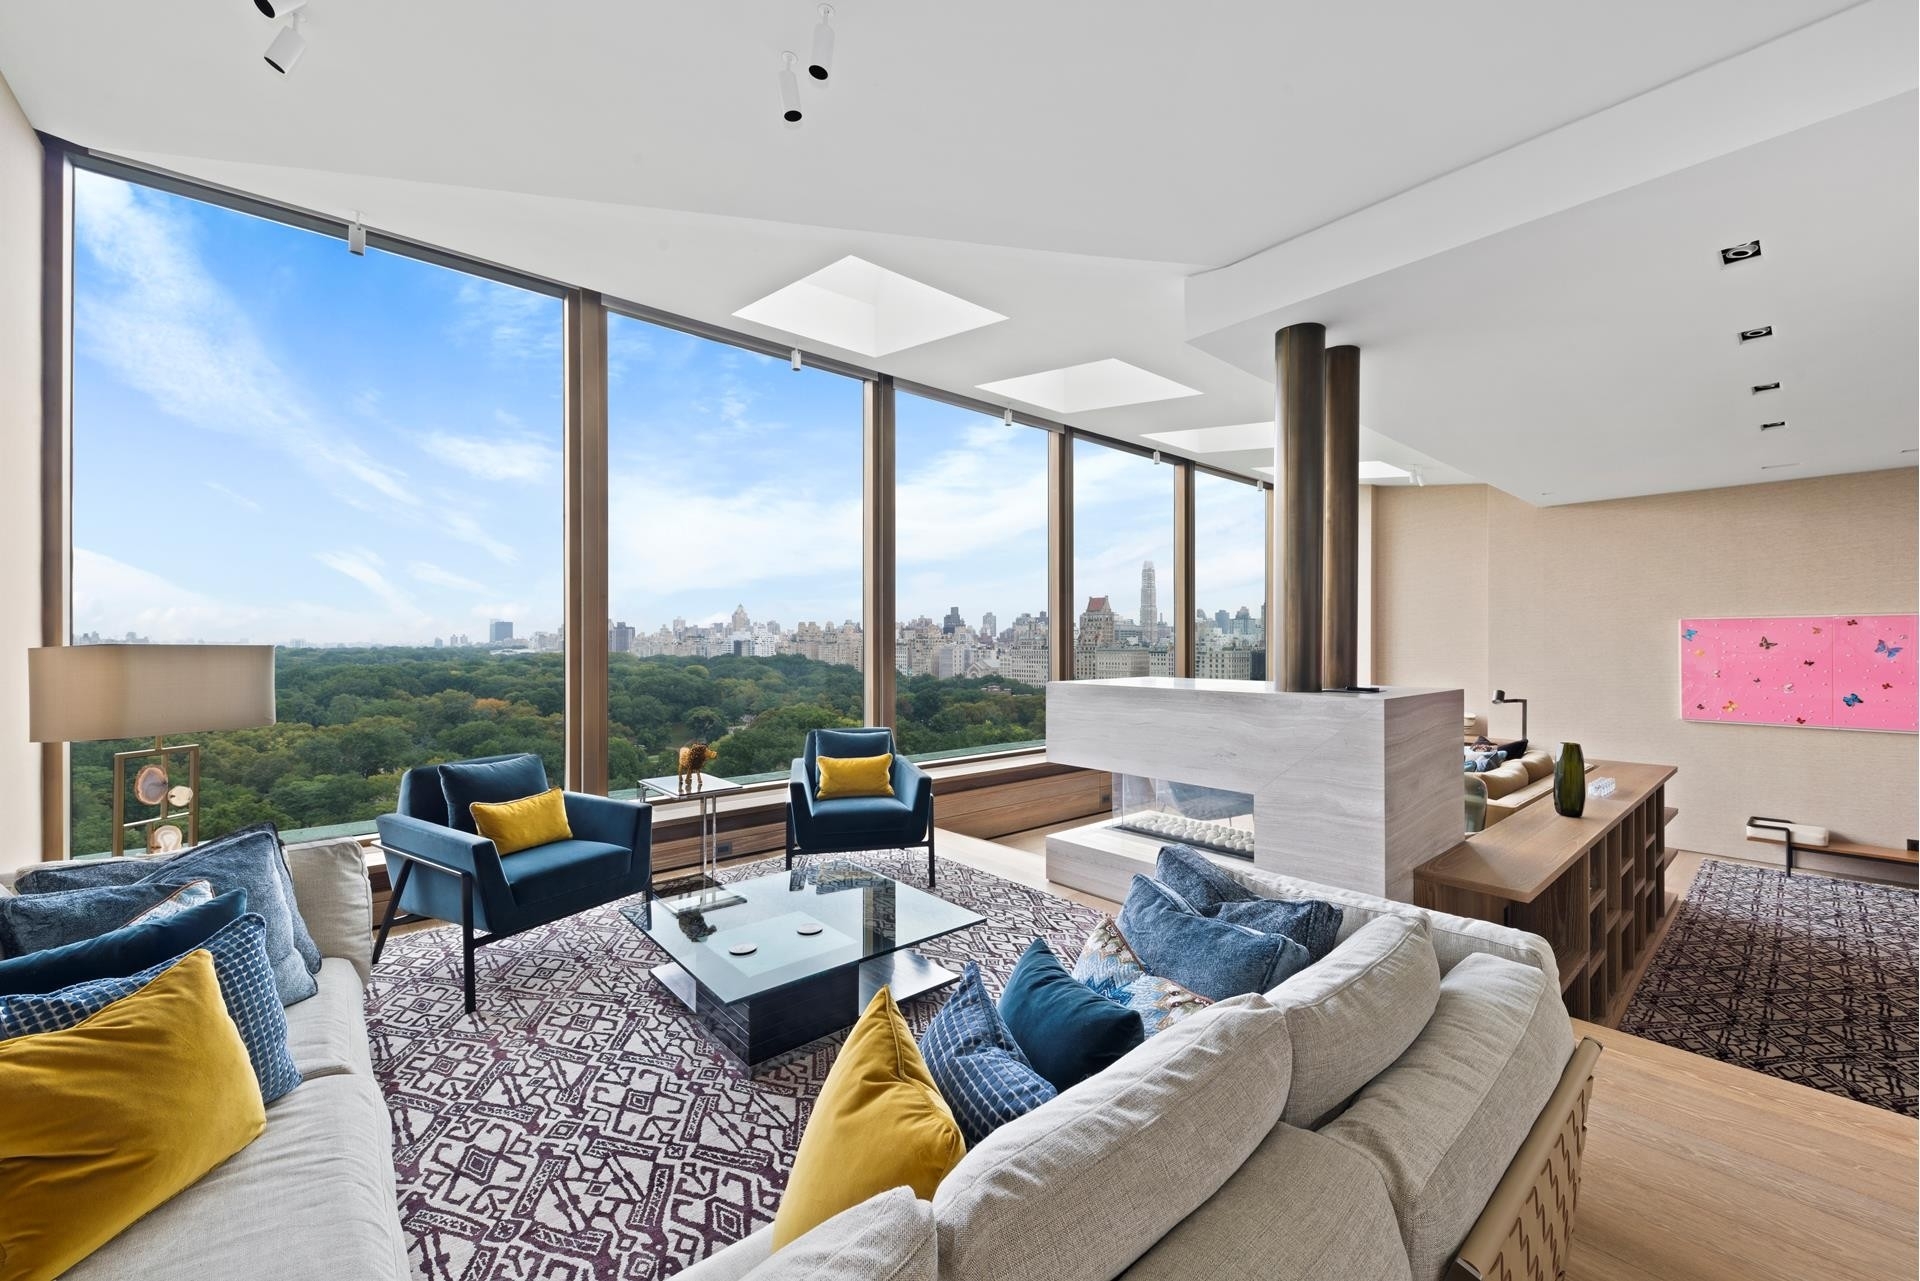 Co-op Properties for Sale at 128 CENTRAL PARK S, PH Central Park South, New York, New York 10019